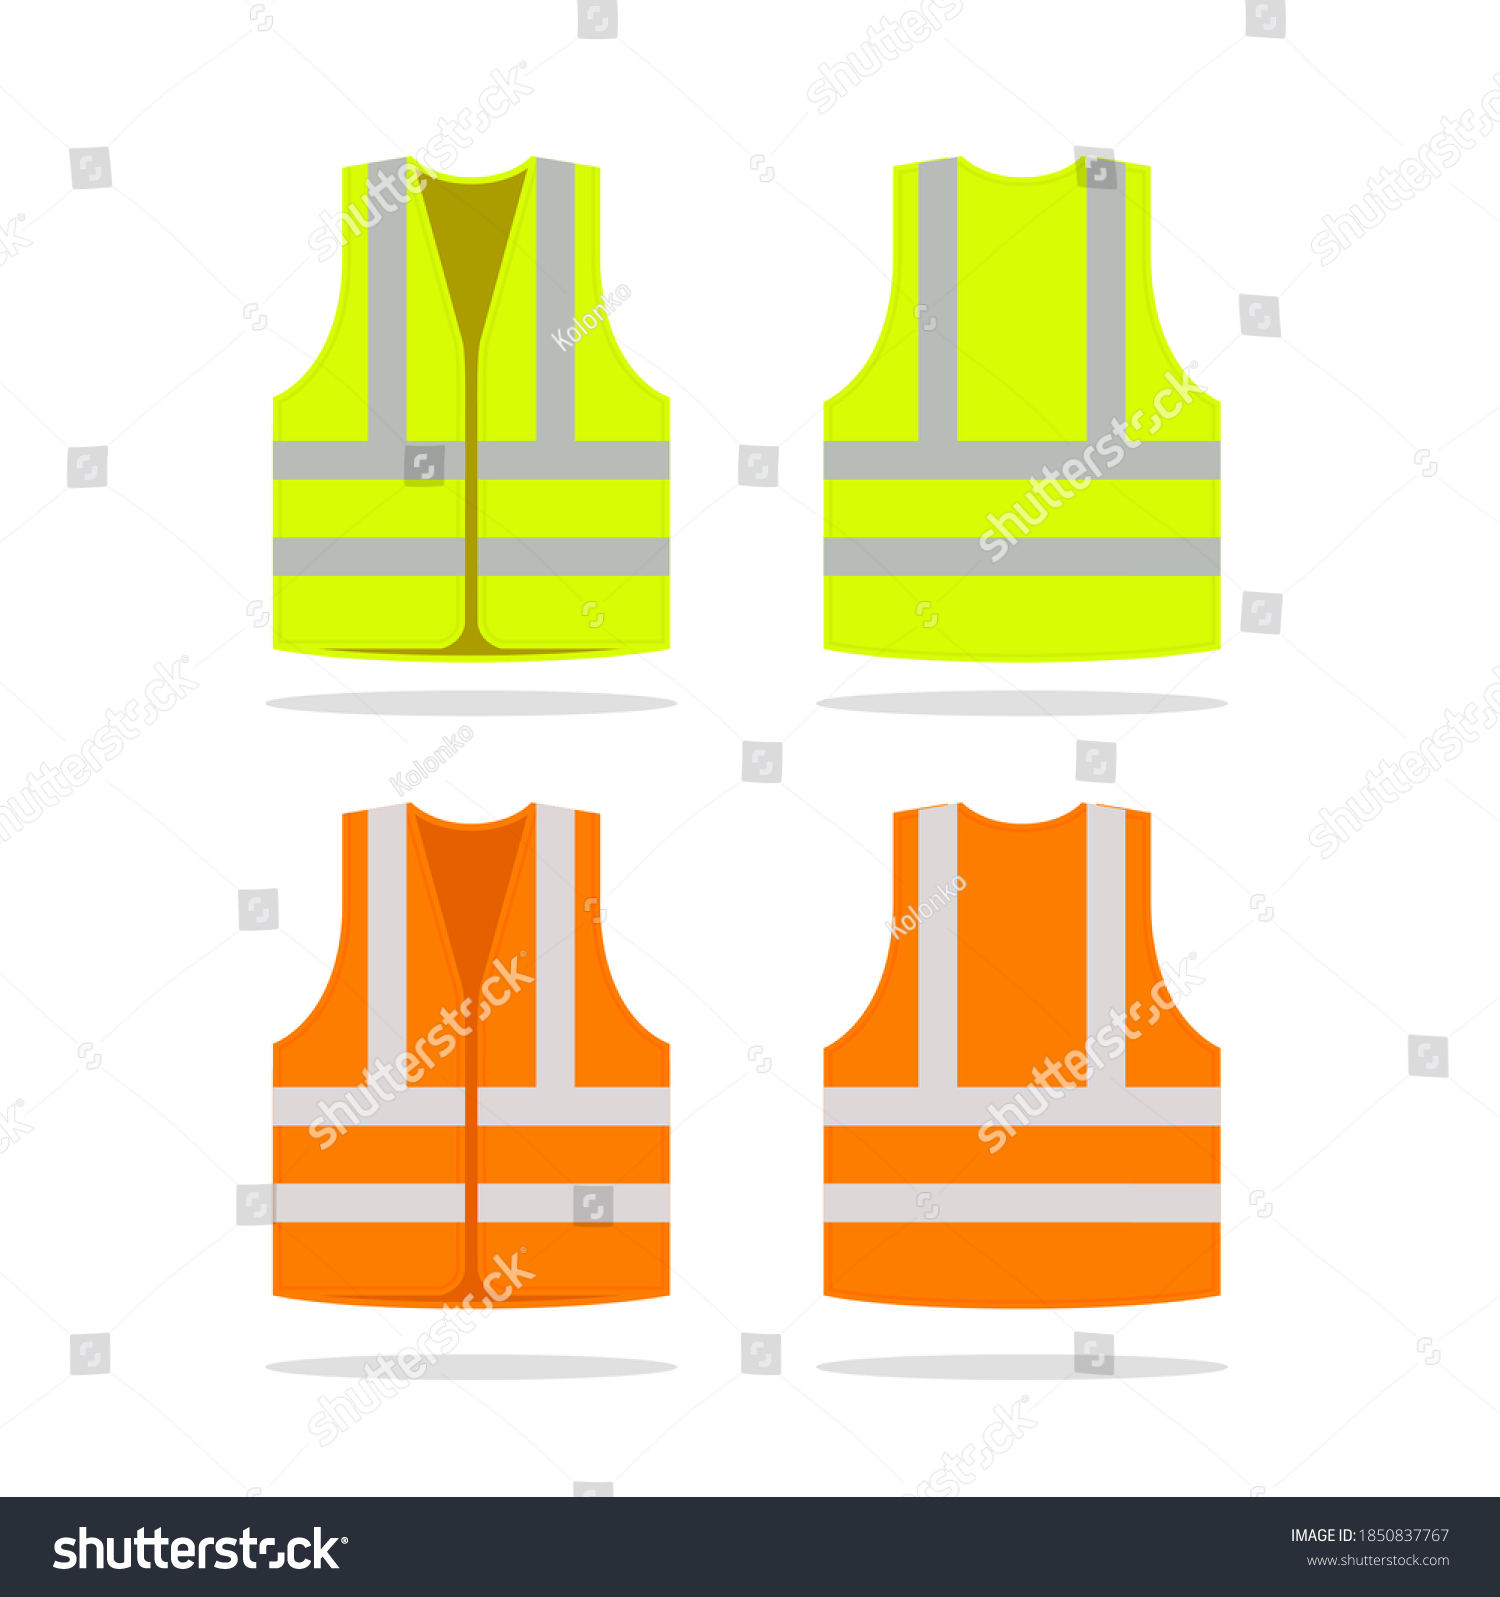 SVG of Safety jacket security icon. Vector life vest yellow visibility fluorescent work jacket svg